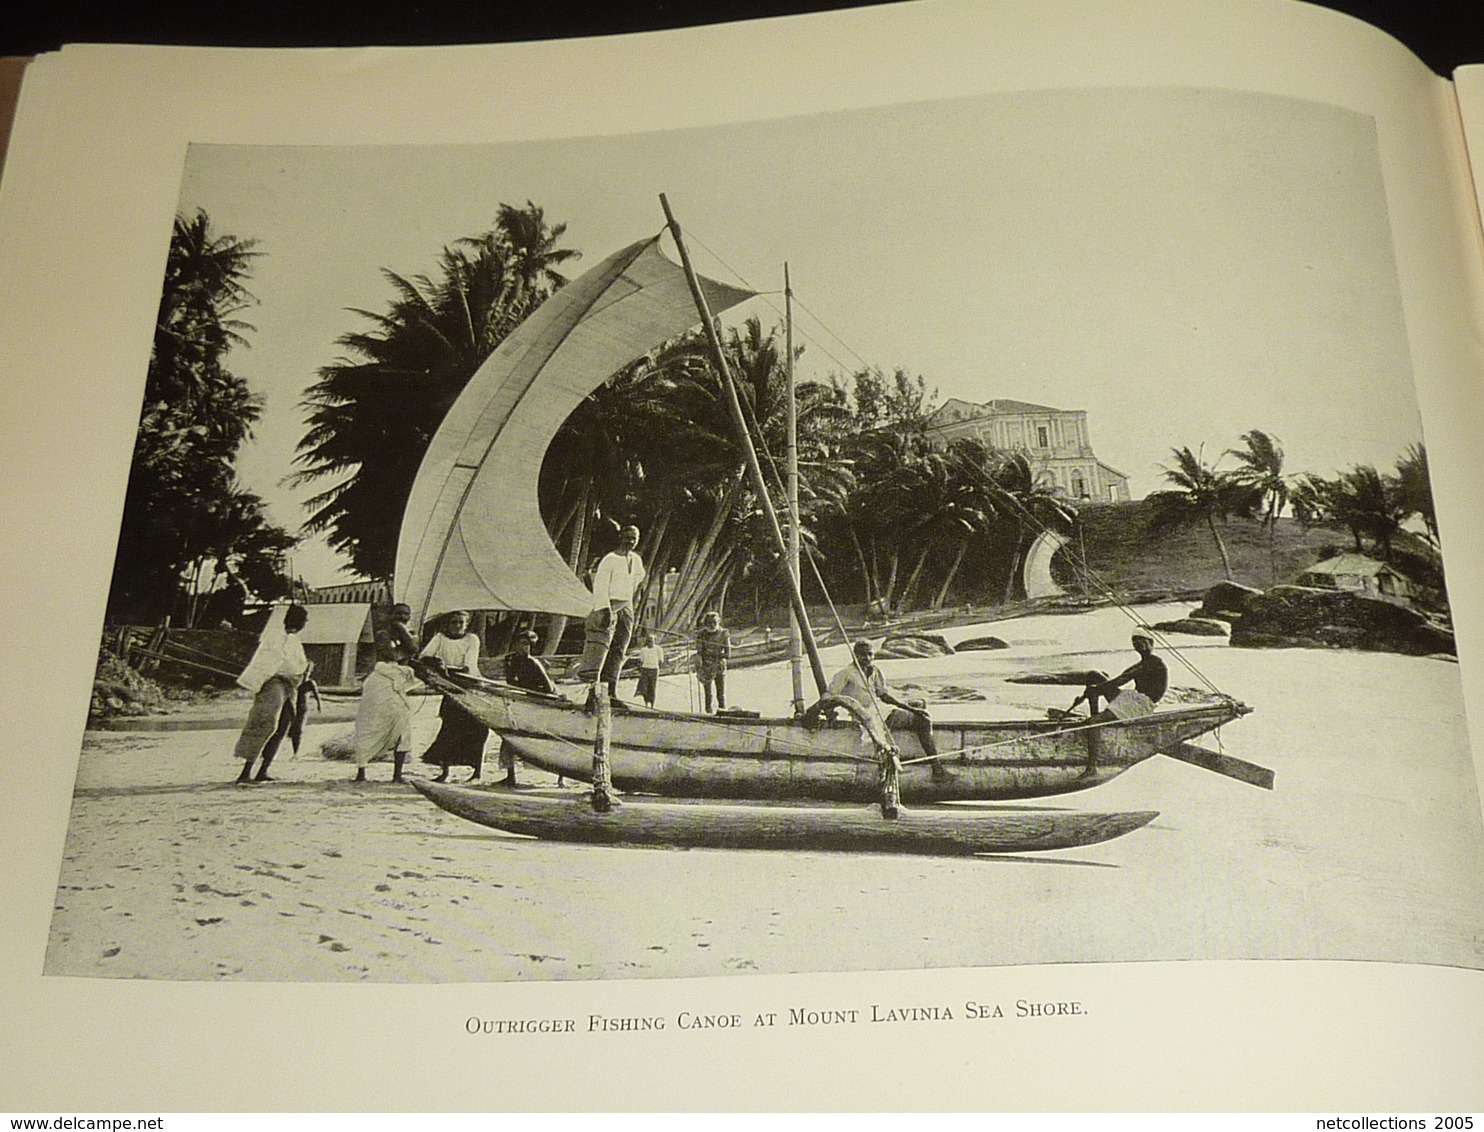 THE HUNDRED BEST VIEWS OF CEYLON - FROM PHOTOGRAPHS TAKEN BY THE PUBLISHERS - 100 MEILLEURS VUES DE CEYLON (AD) - Lieux